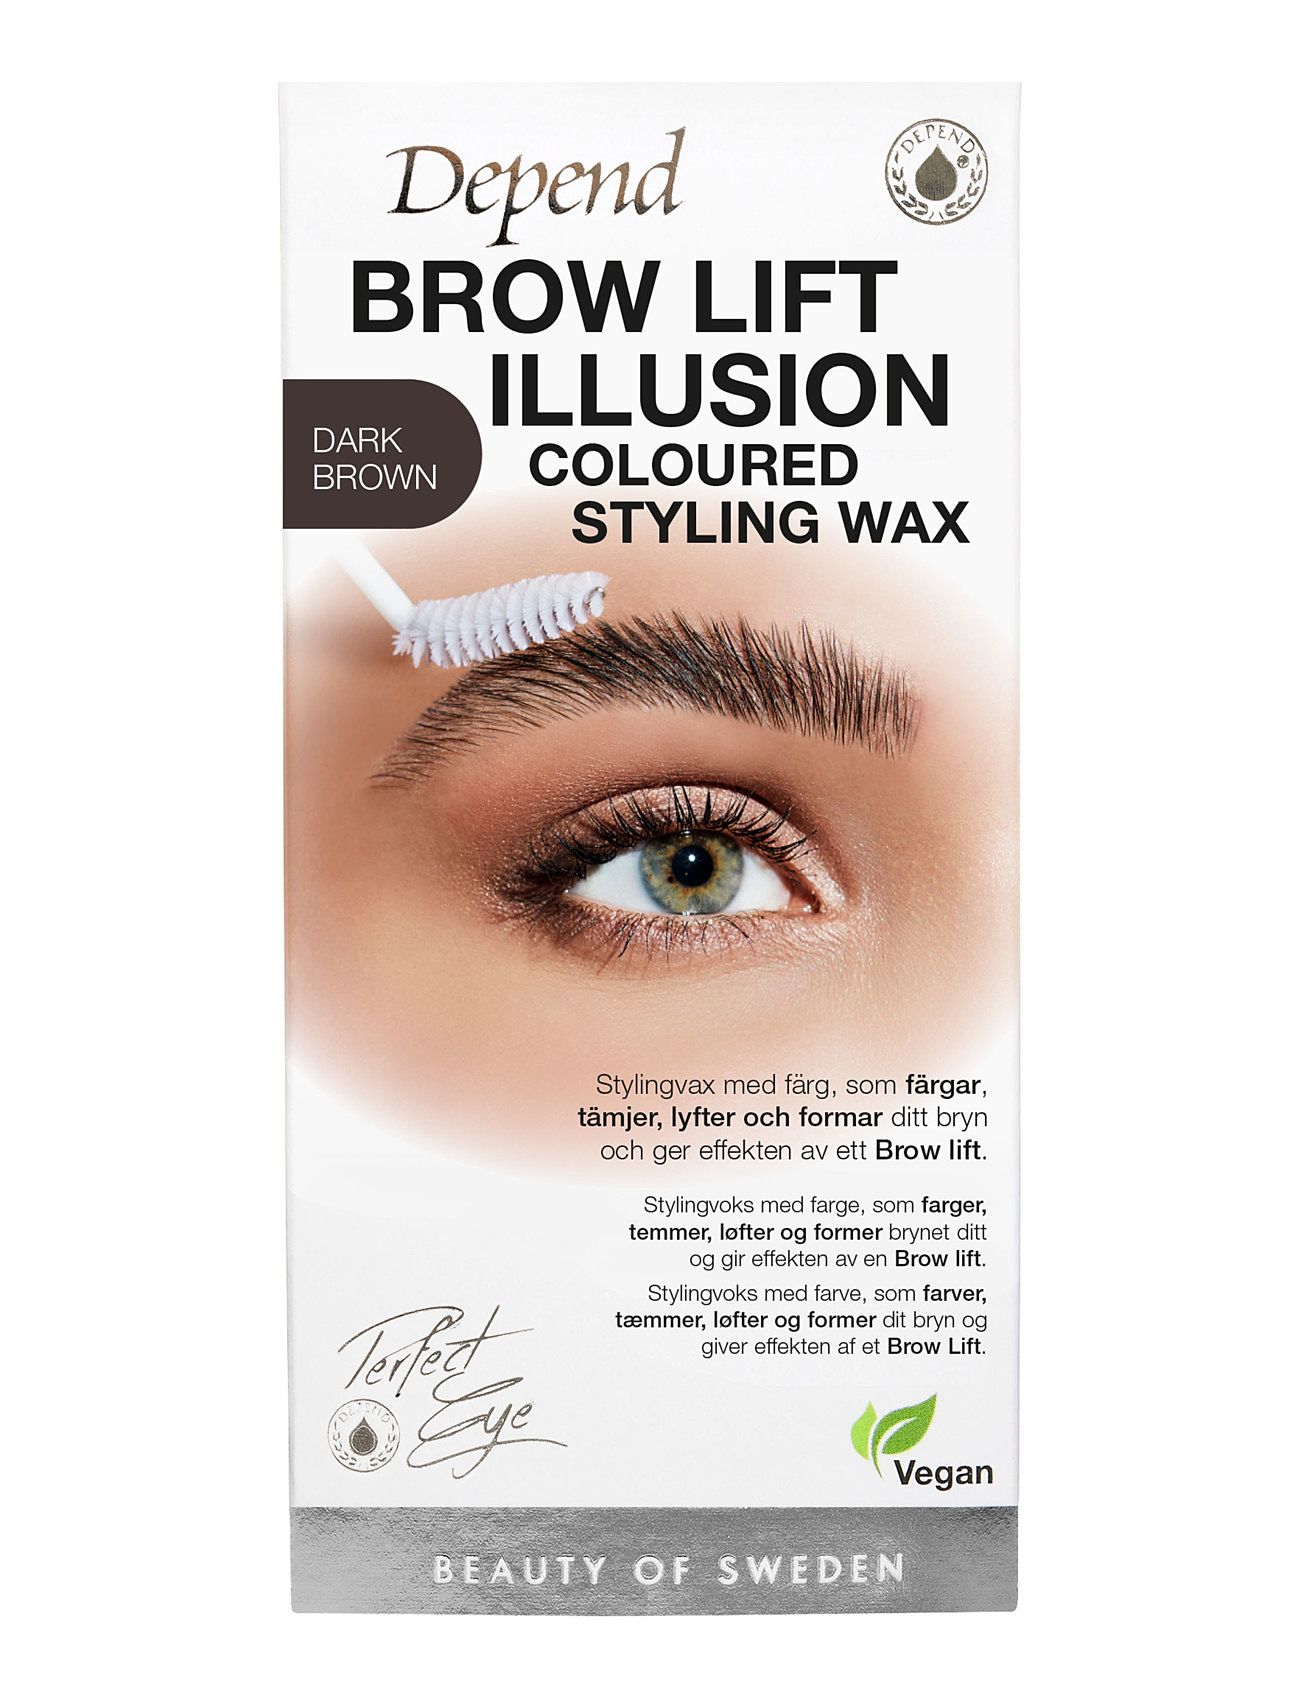 Pe Brow Illusion Wax D.brown Se/No/Dk Beauty Women Makeup Eyes Eyebrows Eyebrow Pomade Nude Depend Cosmetic